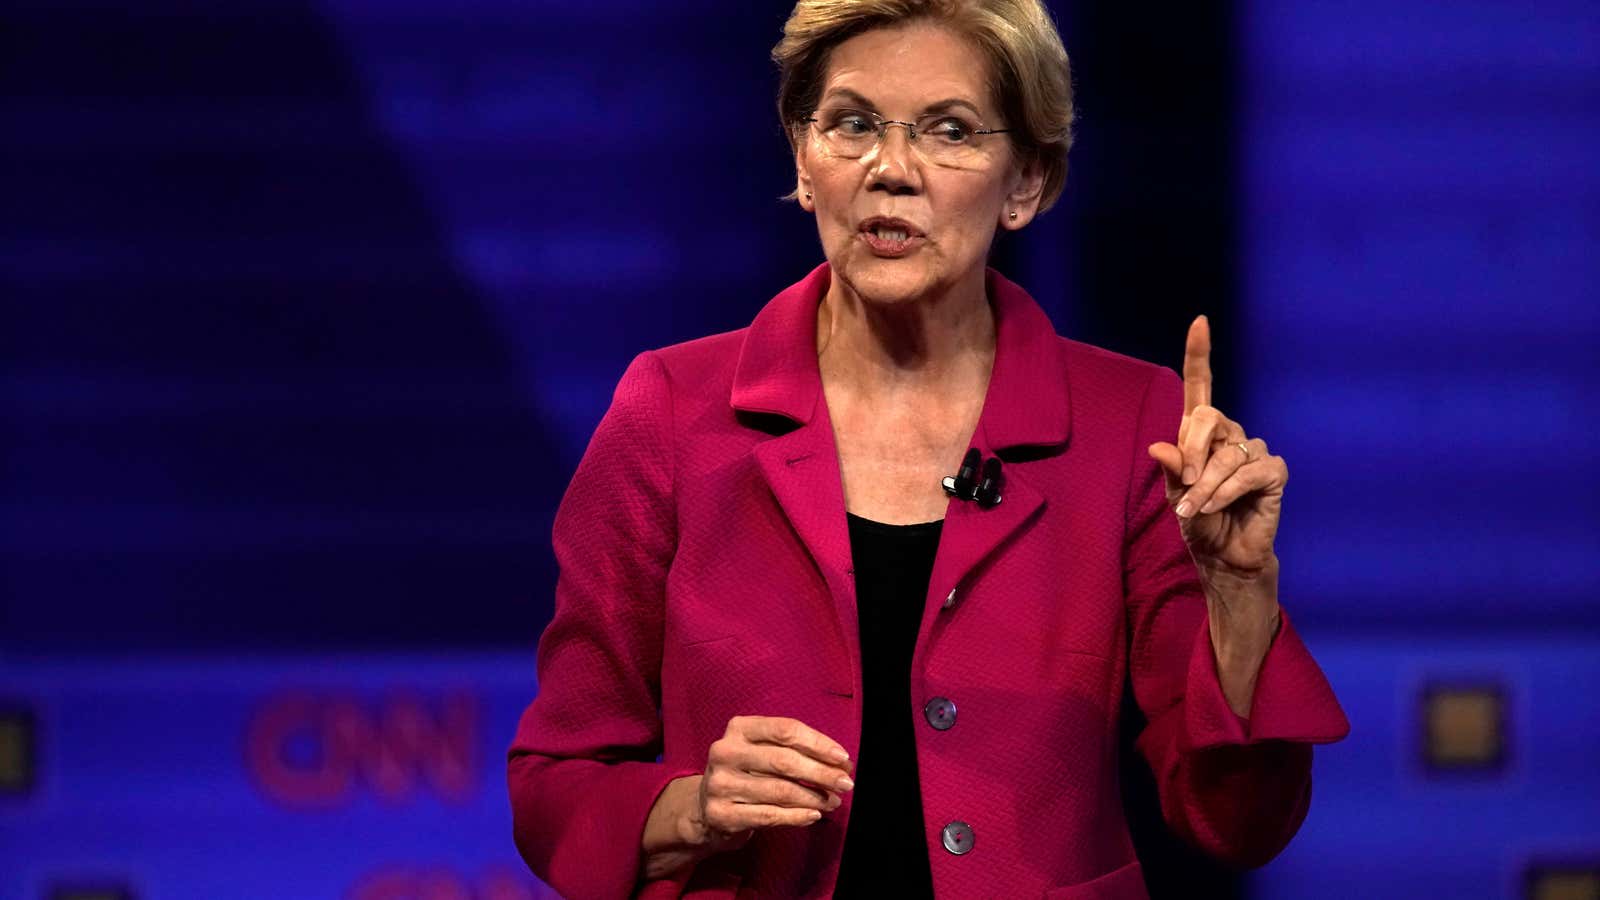 Senator Elizabeth Warren wants Facebook to tackle political lies. Out-of-context truths are an even greater challenge.